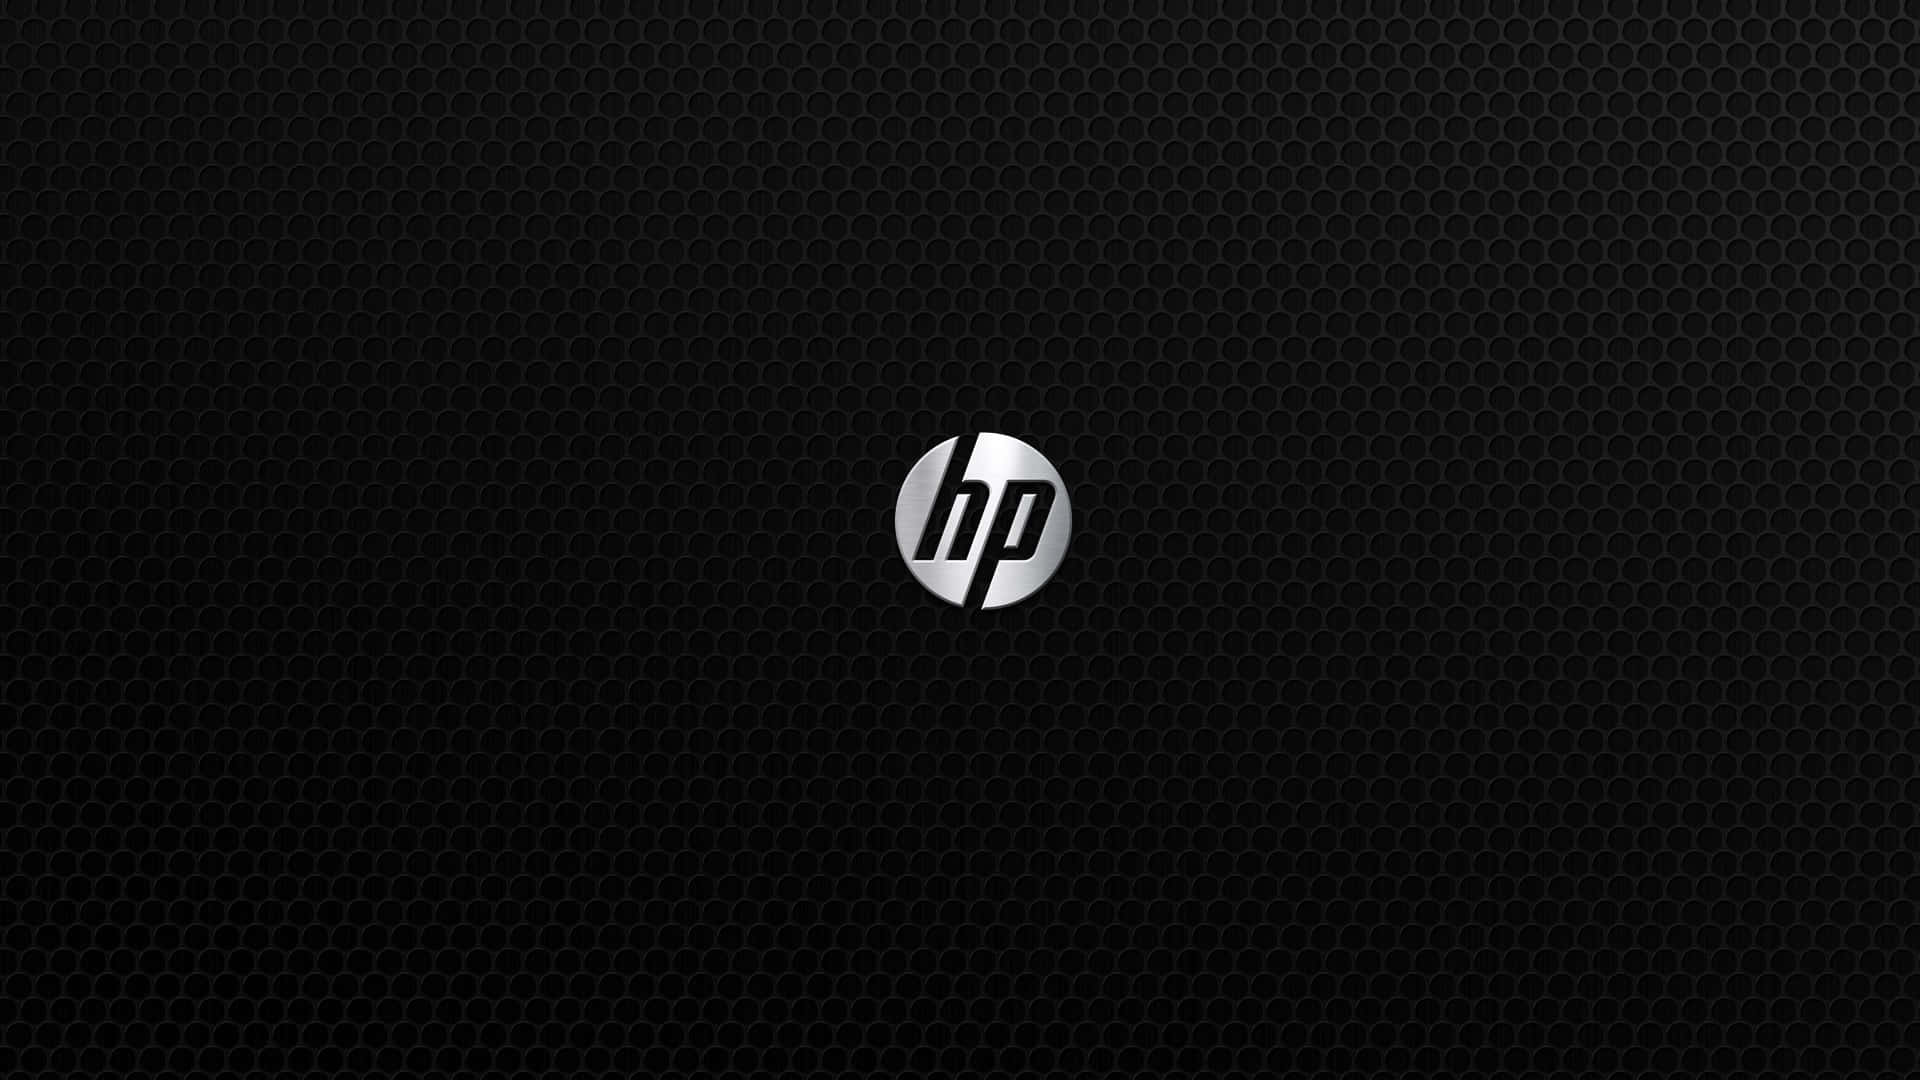 Power Up Your Projects with HP